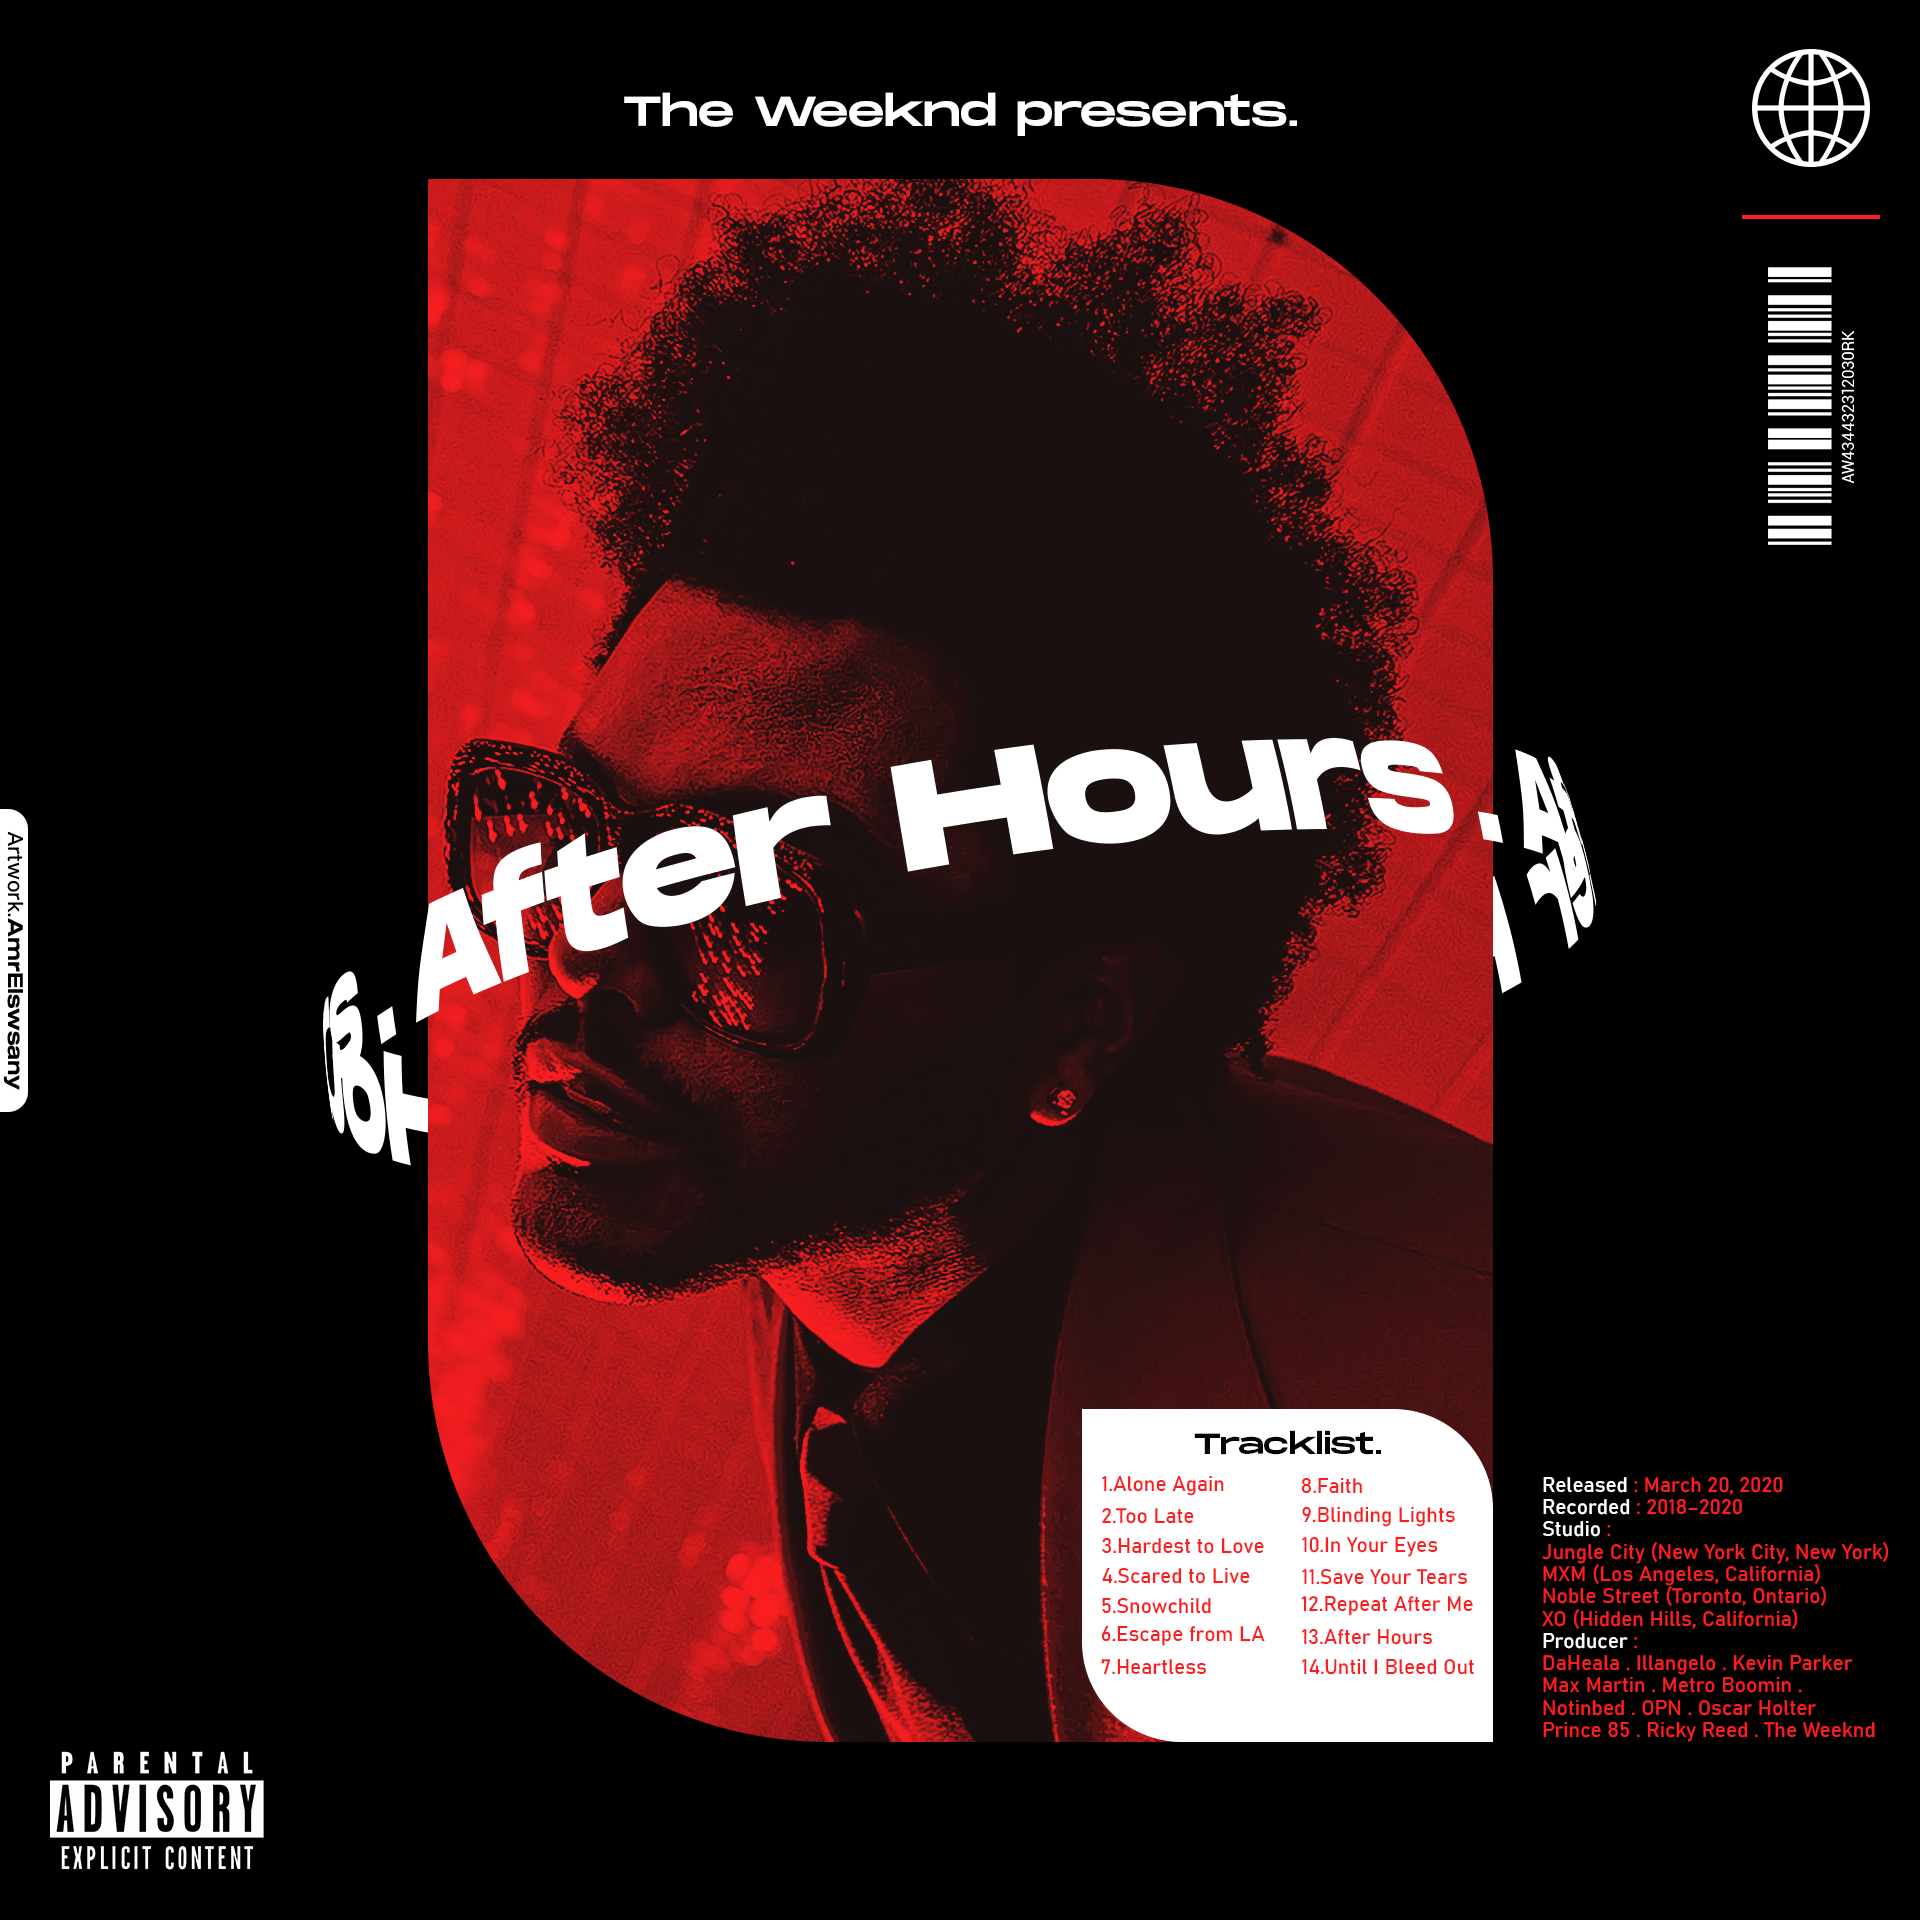 Details about   X923 The Weeknd After Hours Deluxe Scaled Rap 2020 Mixtape Fabric Poster 24x24